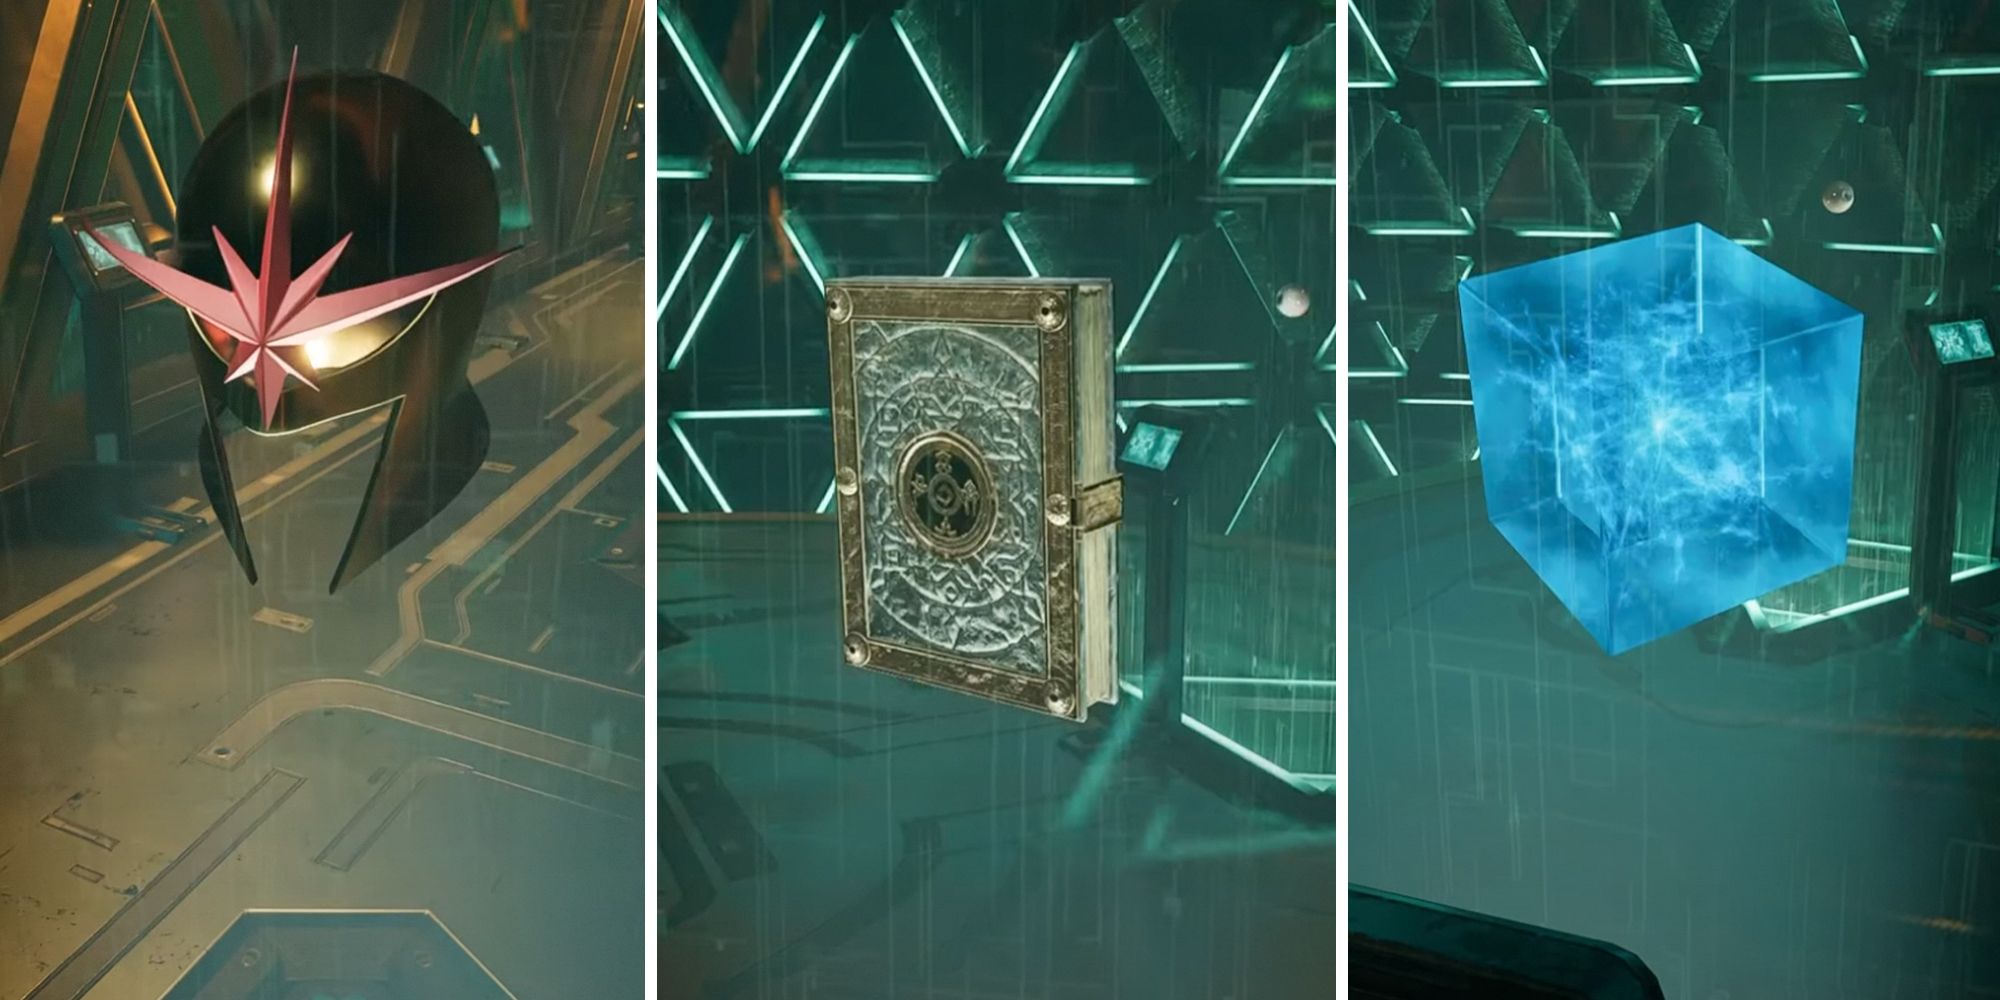 Guardians Of The Galaxy. Split image three ways. Nova helmet on left, book in the middle and cosmic stone on right.